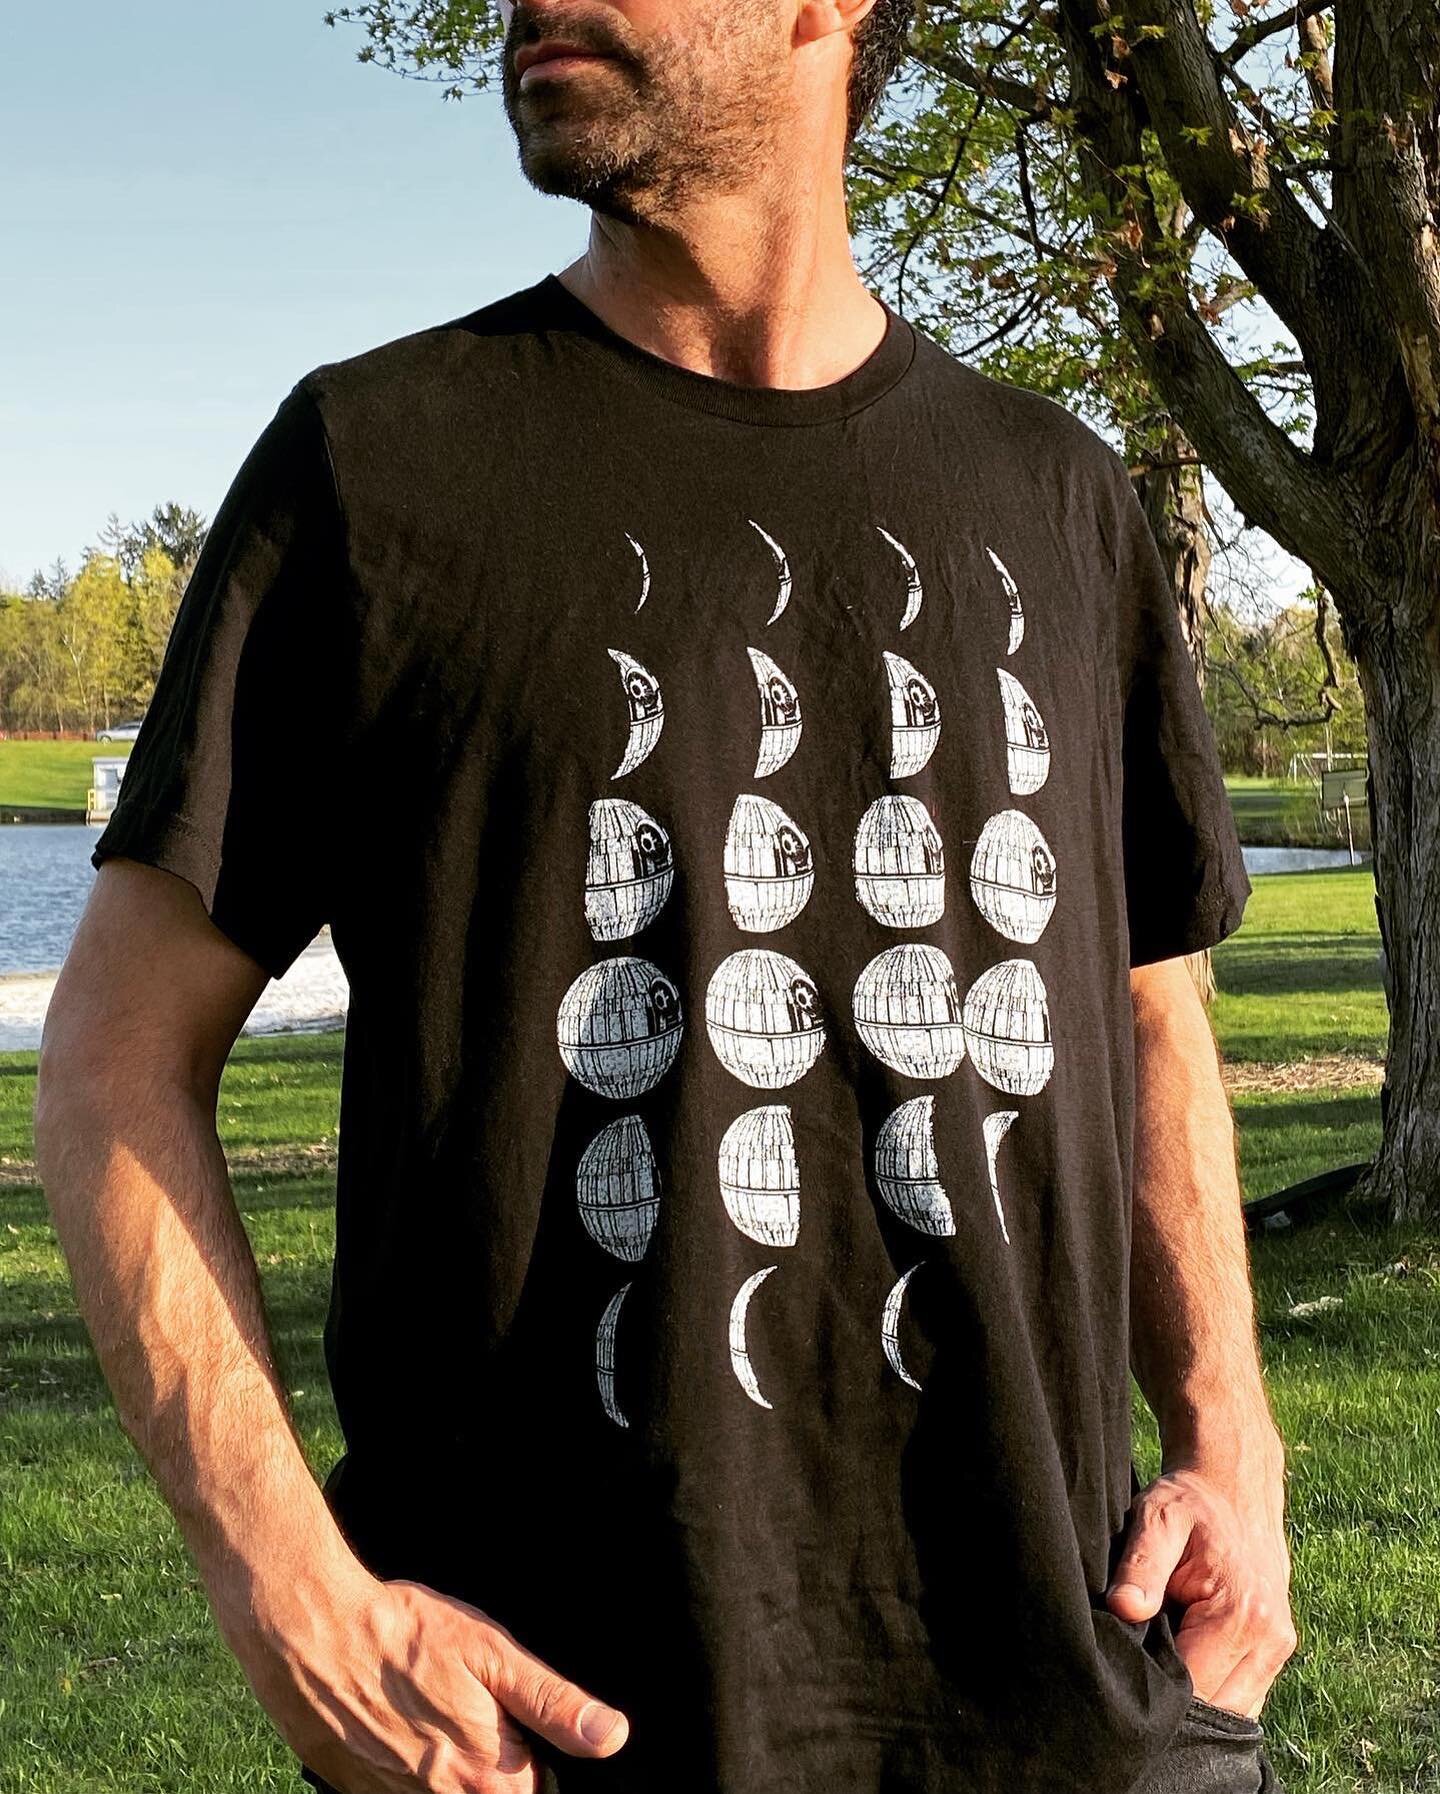 New! A.Louie designs first clothing drop of 2023!
Just in time for May4th (Star Wars Day)

Have you ever wondered what the Death Star would look like if you were seeing it in the night sky? We&rsquo;ll wonder no more! Wear it!
Get yours today! 4 uniq